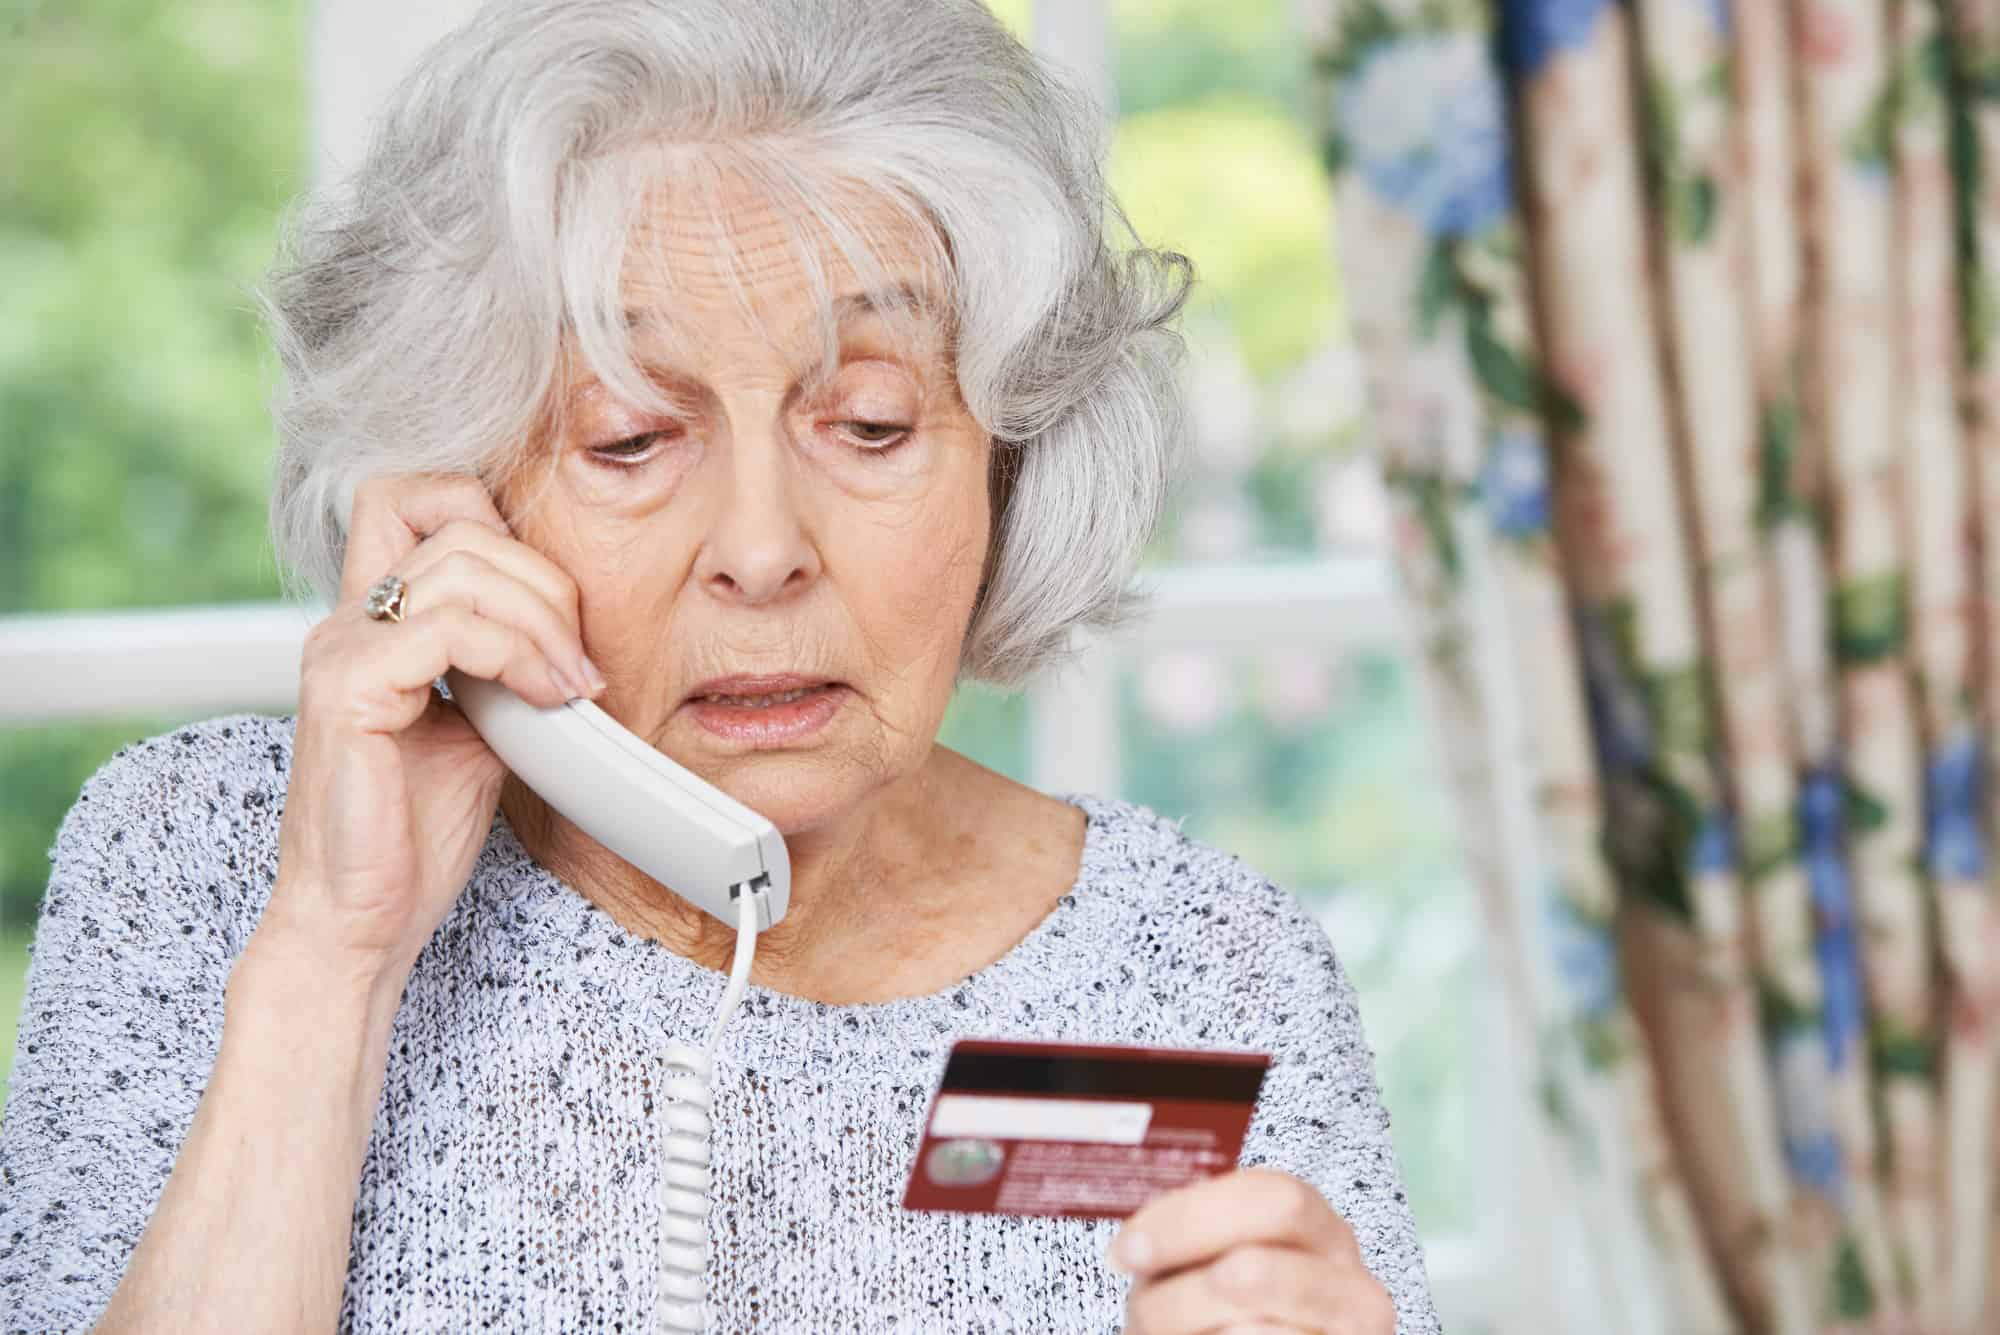 scam old lady on phone credit card